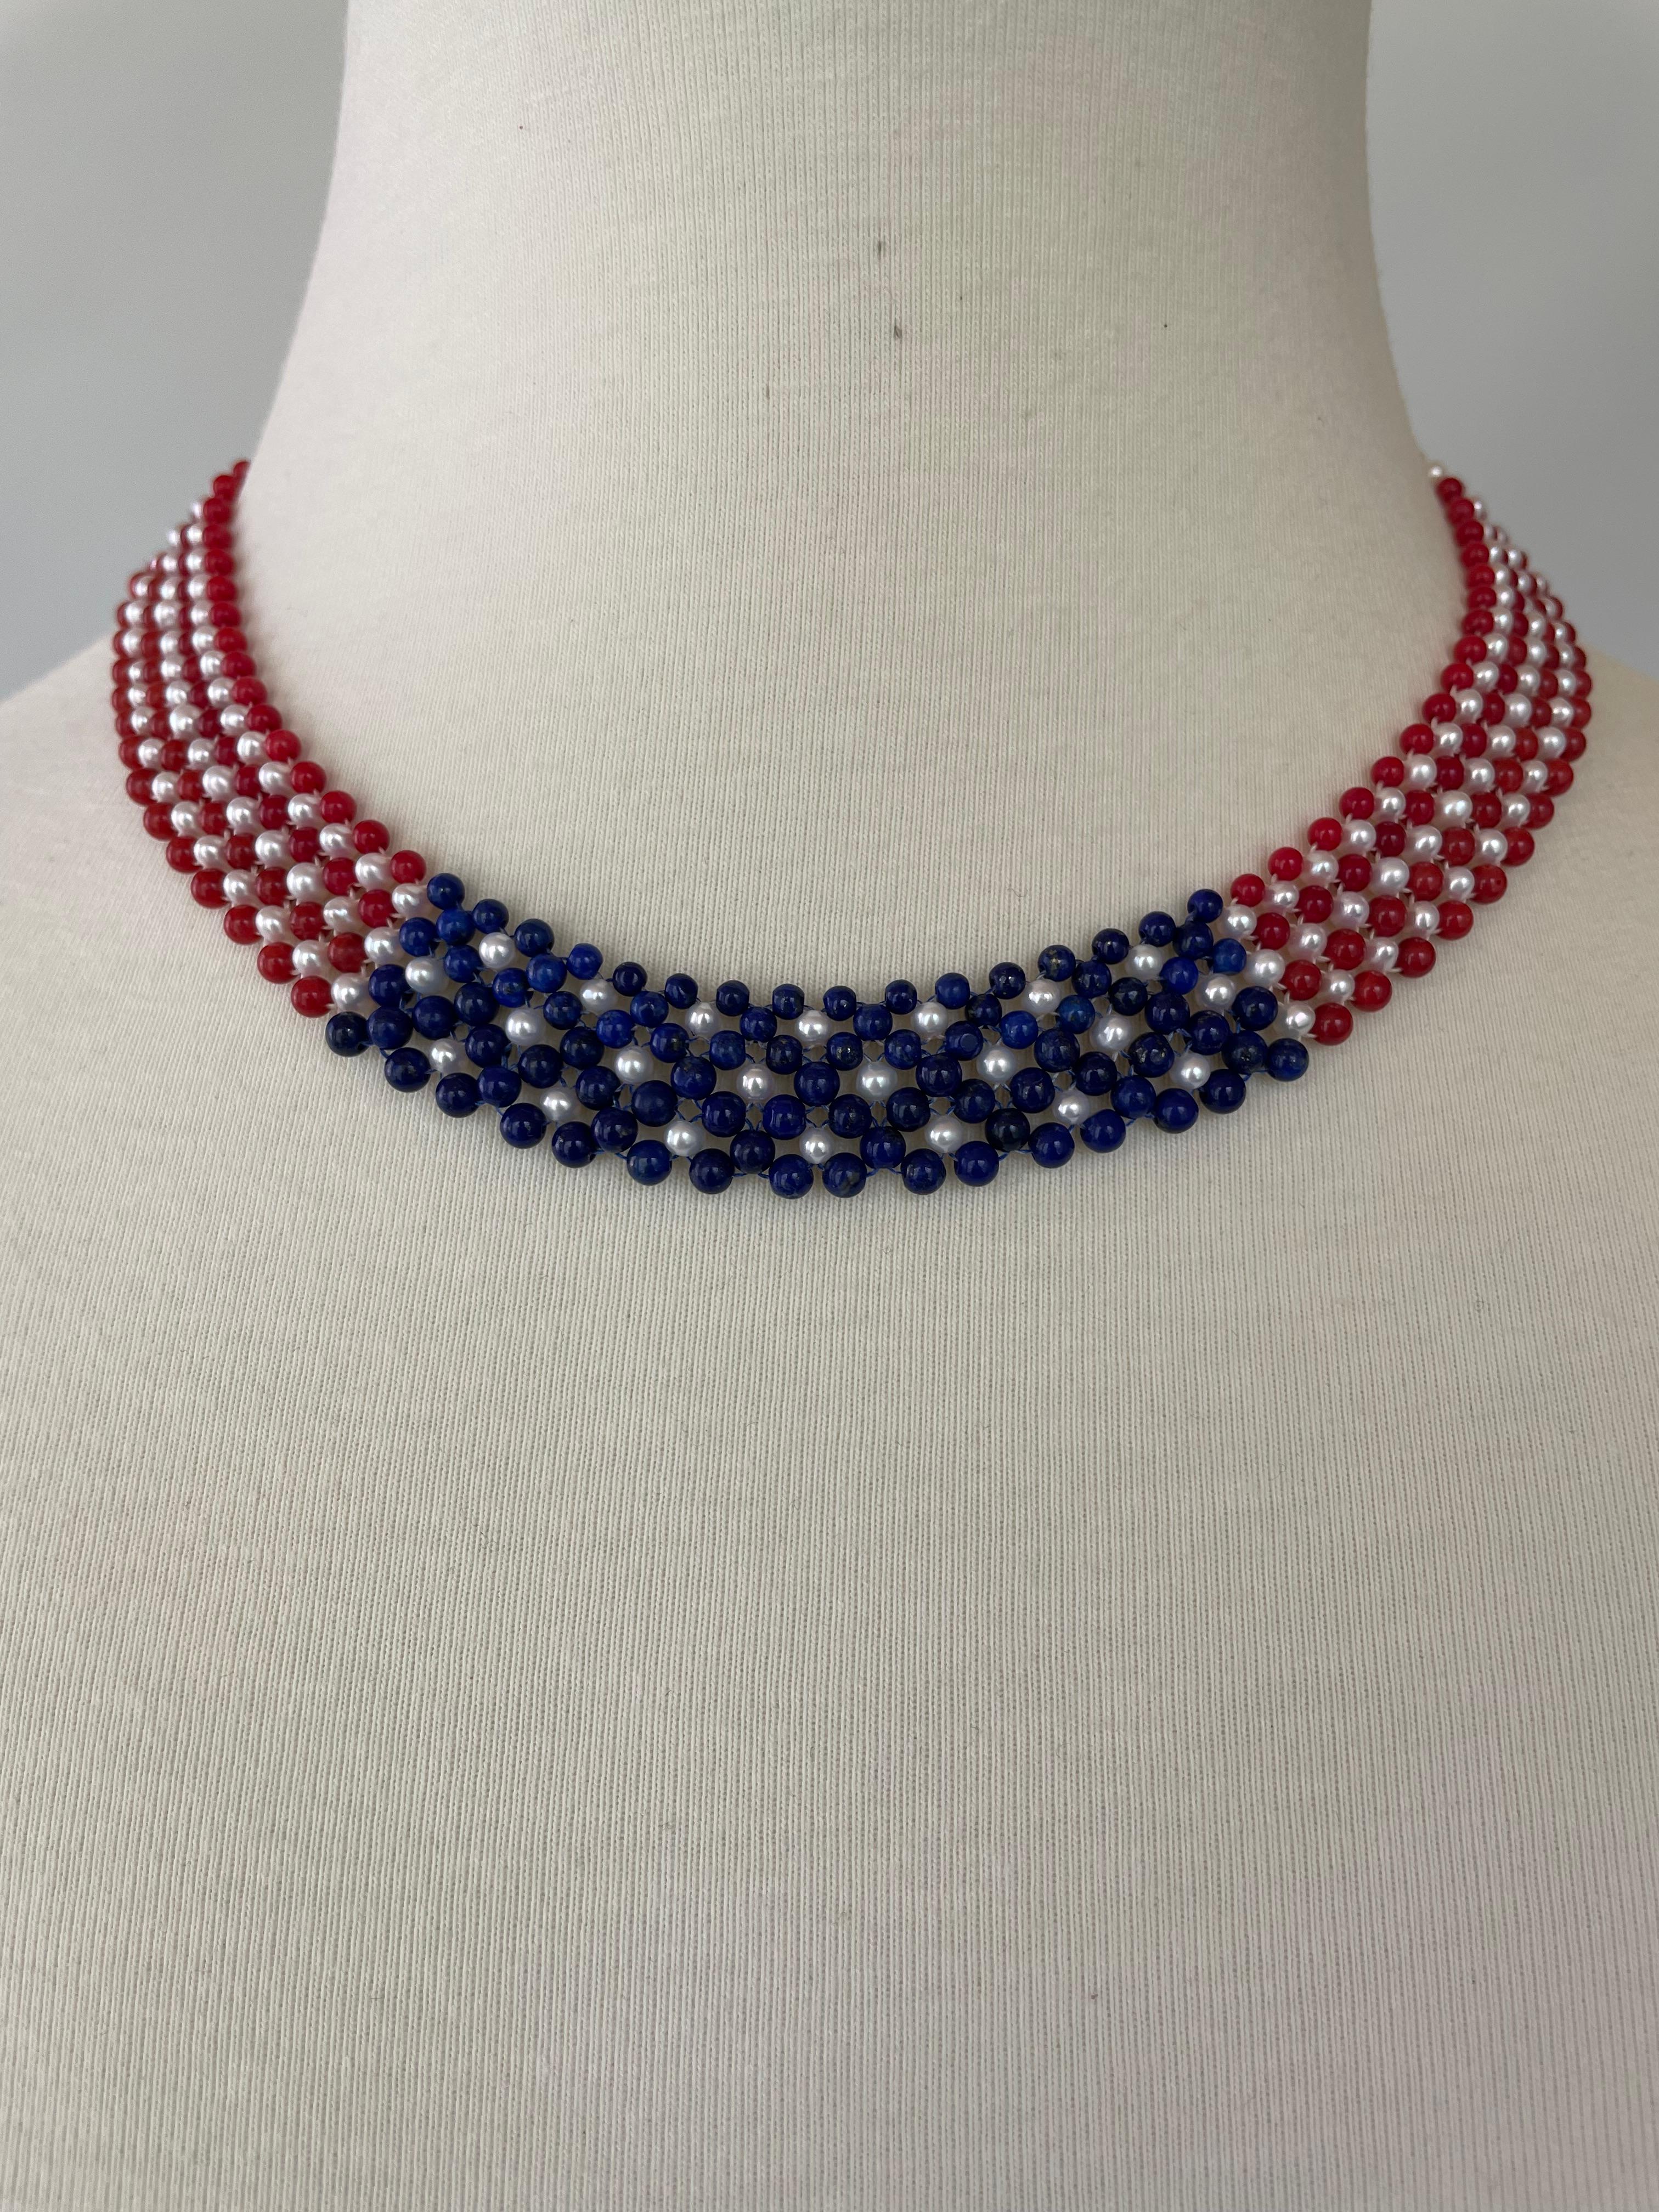 Bead Marina J. American Flag Woven Pearl, Coral, & Lapis Necklace with 14K Yellow G. For Sale